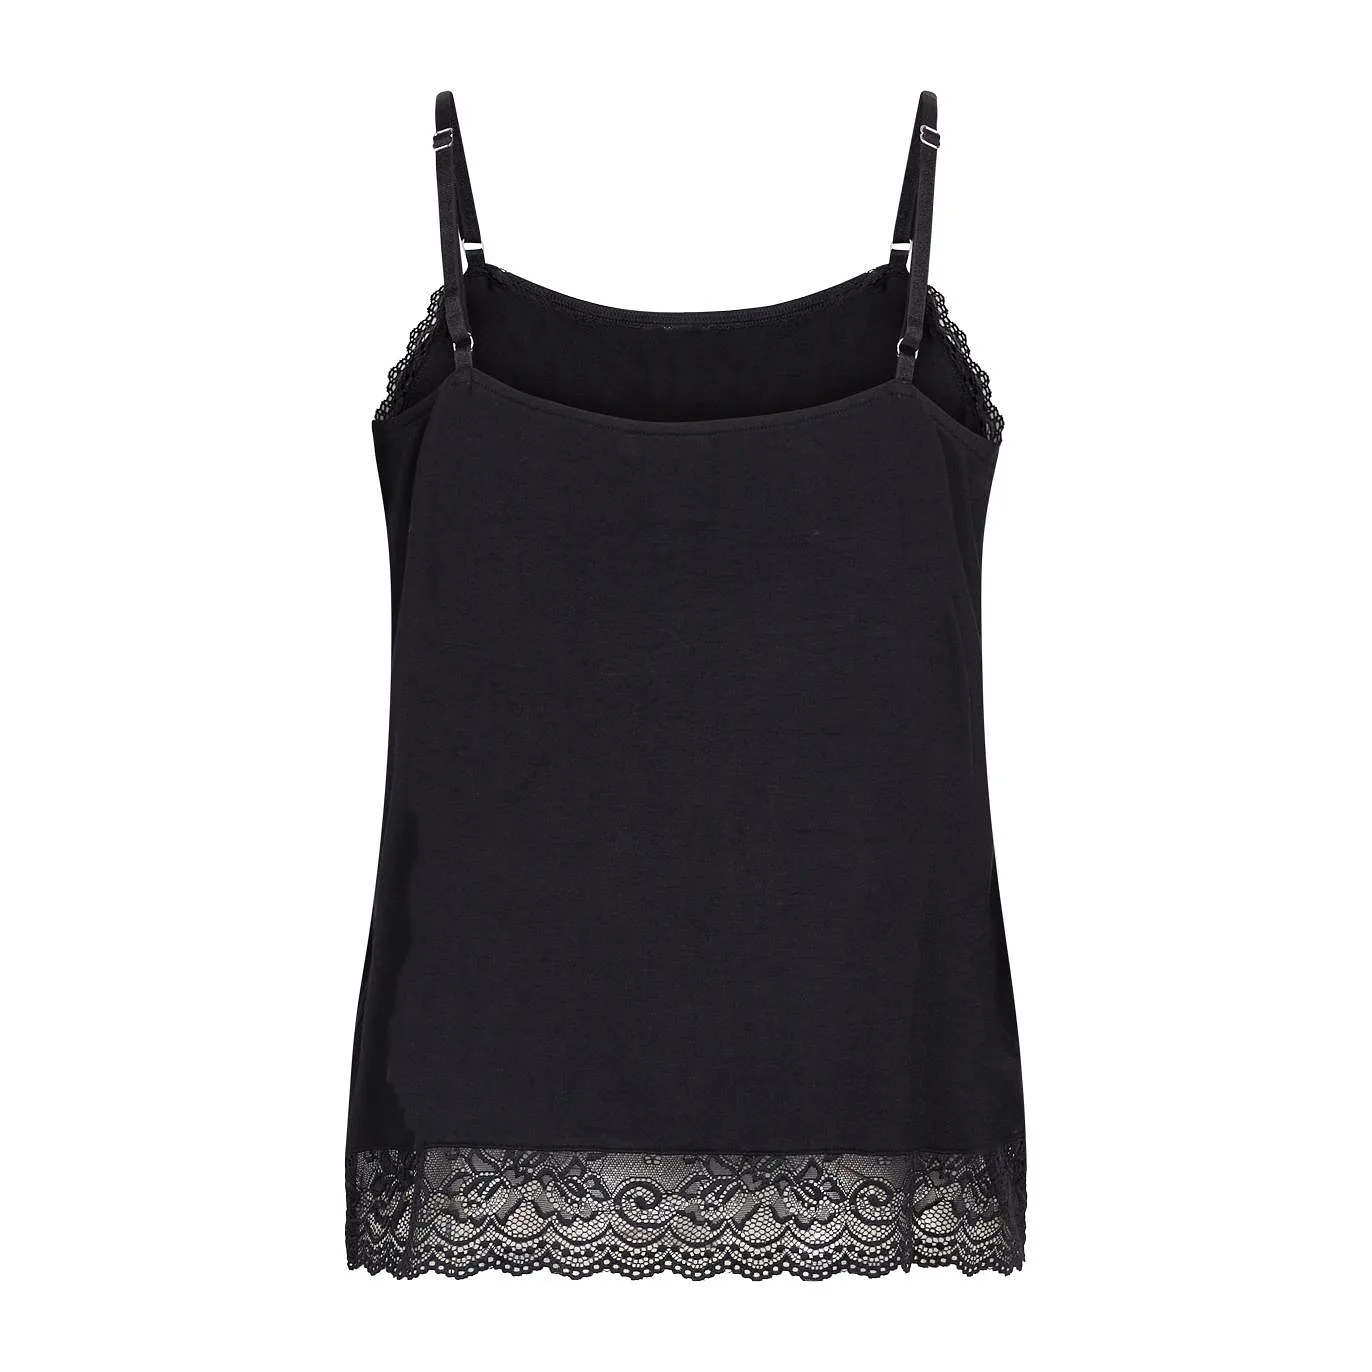 Ccdk Kendall Chemise Top Black